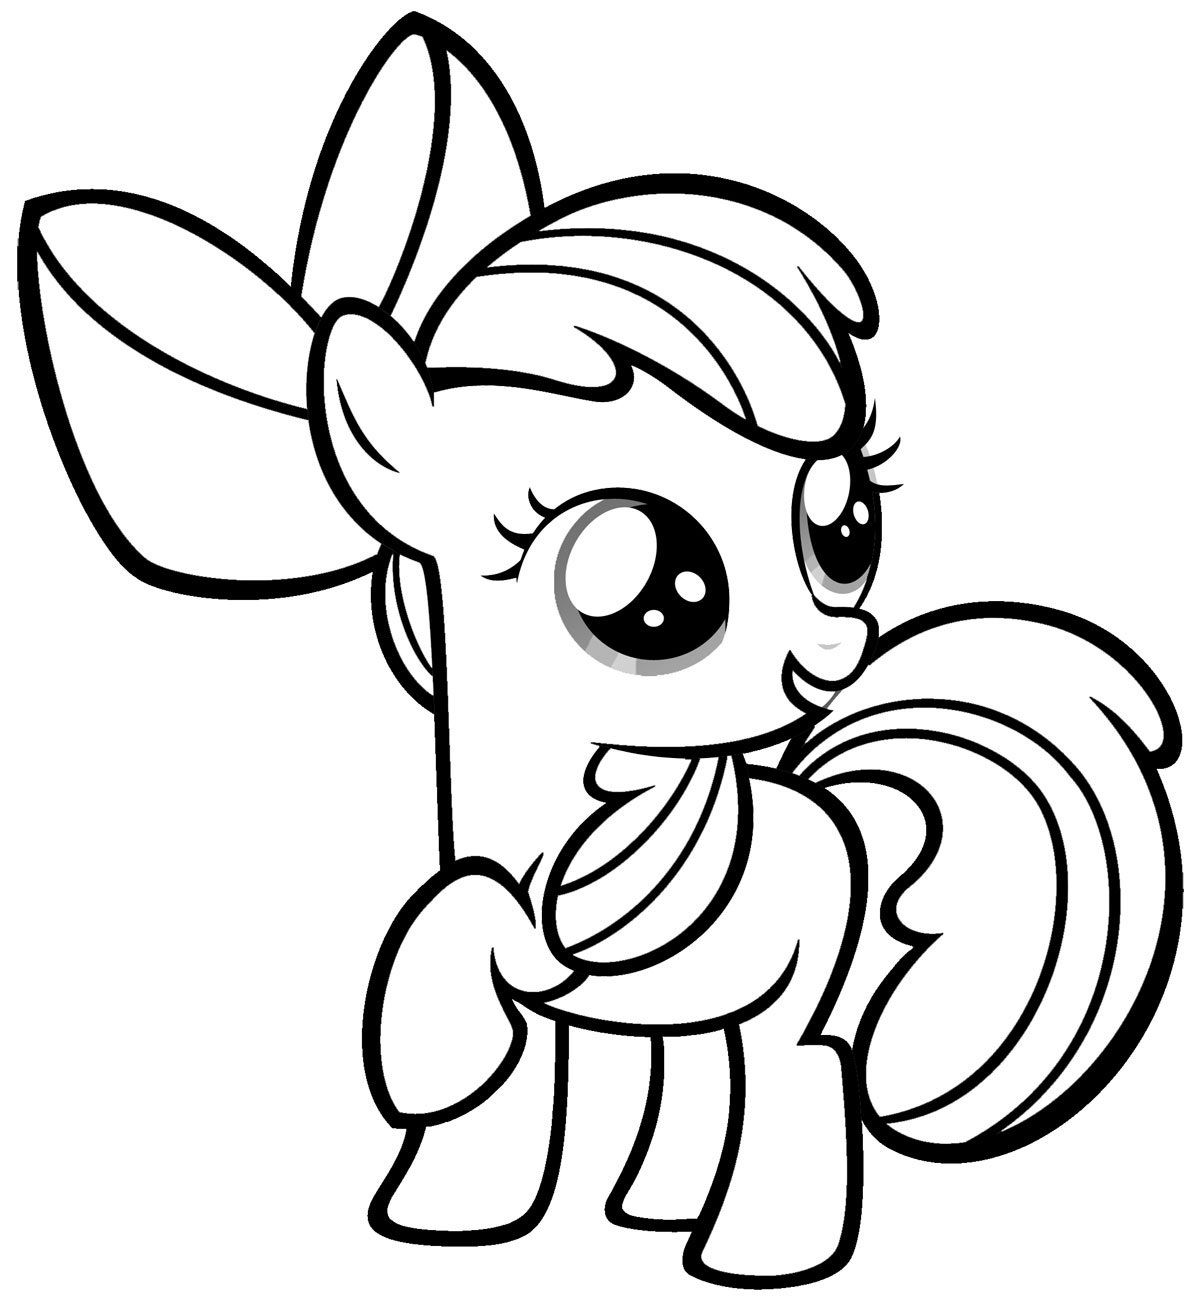 Cute Little Pony Coloring Page - Free Printable Coloring Pages for Kids